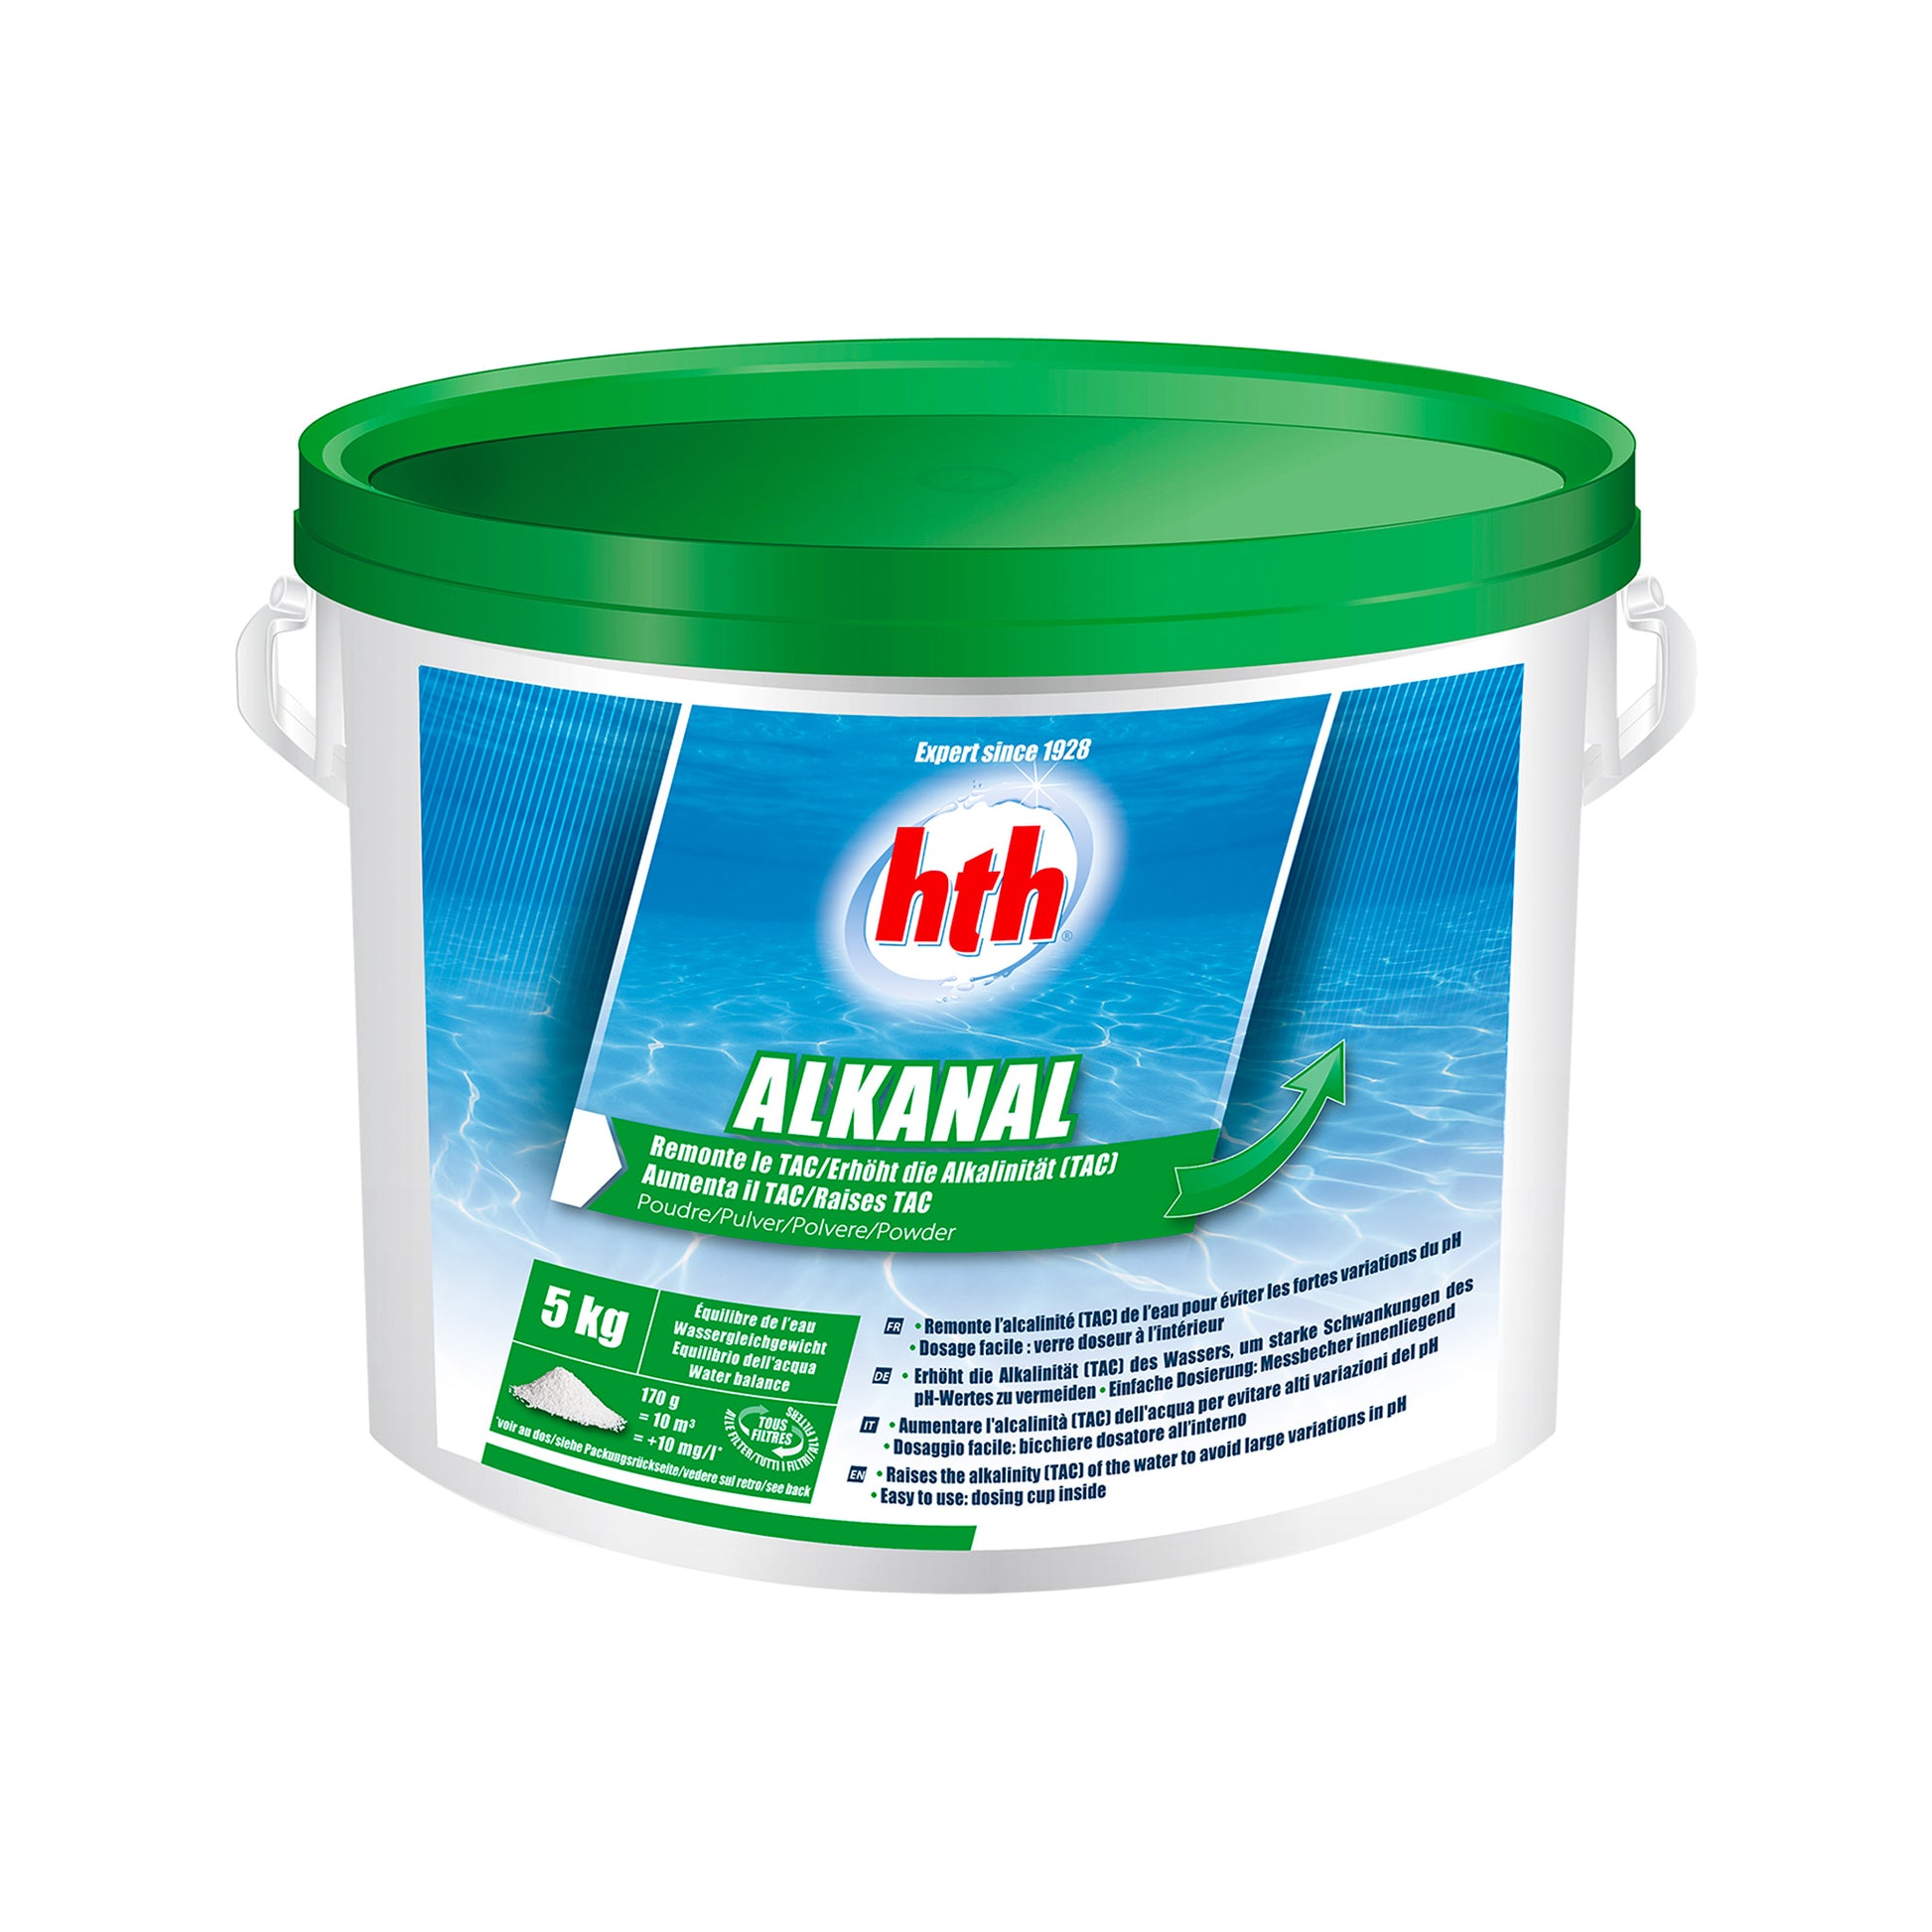 5kg Tub of Alkalinity Increaser, green and blue label, white tub and green lid. Cutout image on white background.